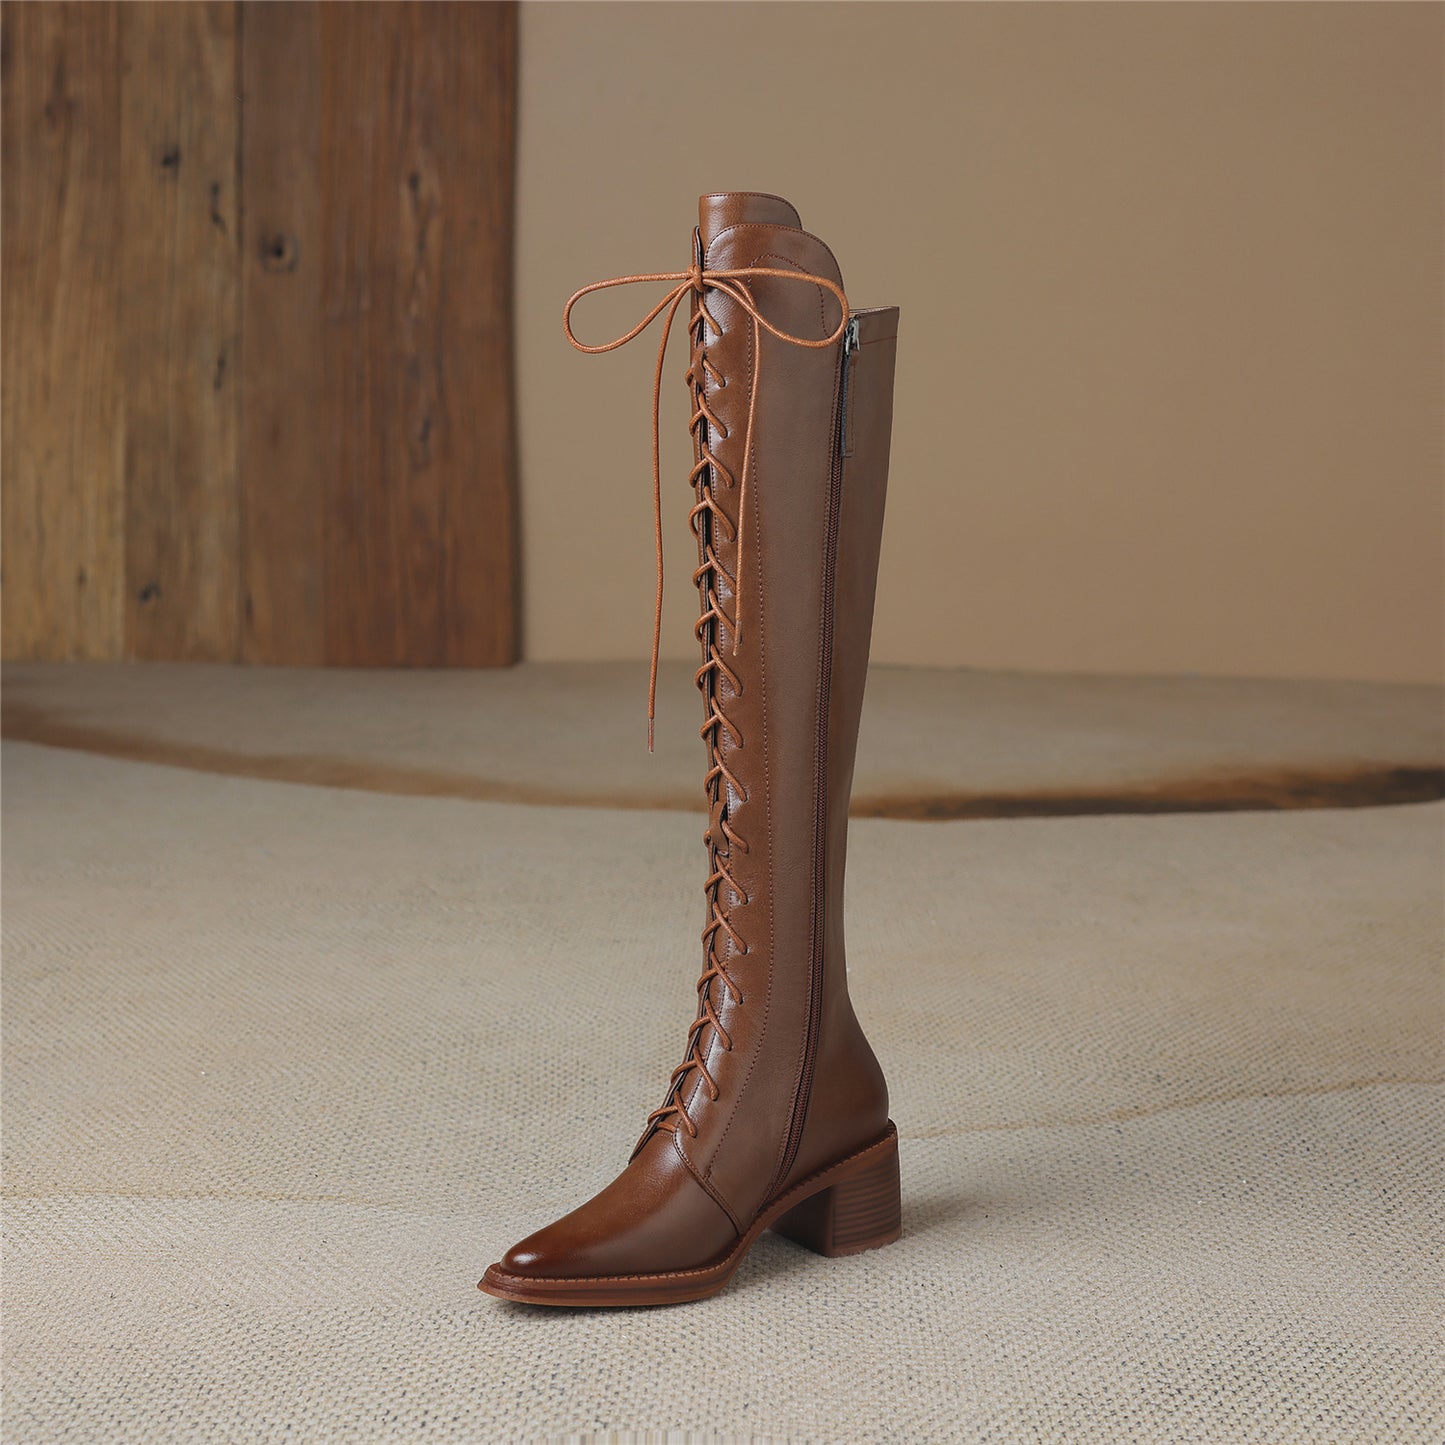 TinaCus Genuine Leather Women's Front Band Pointed Toe Handmade Chunky Heel Zip Up Knee High Boots